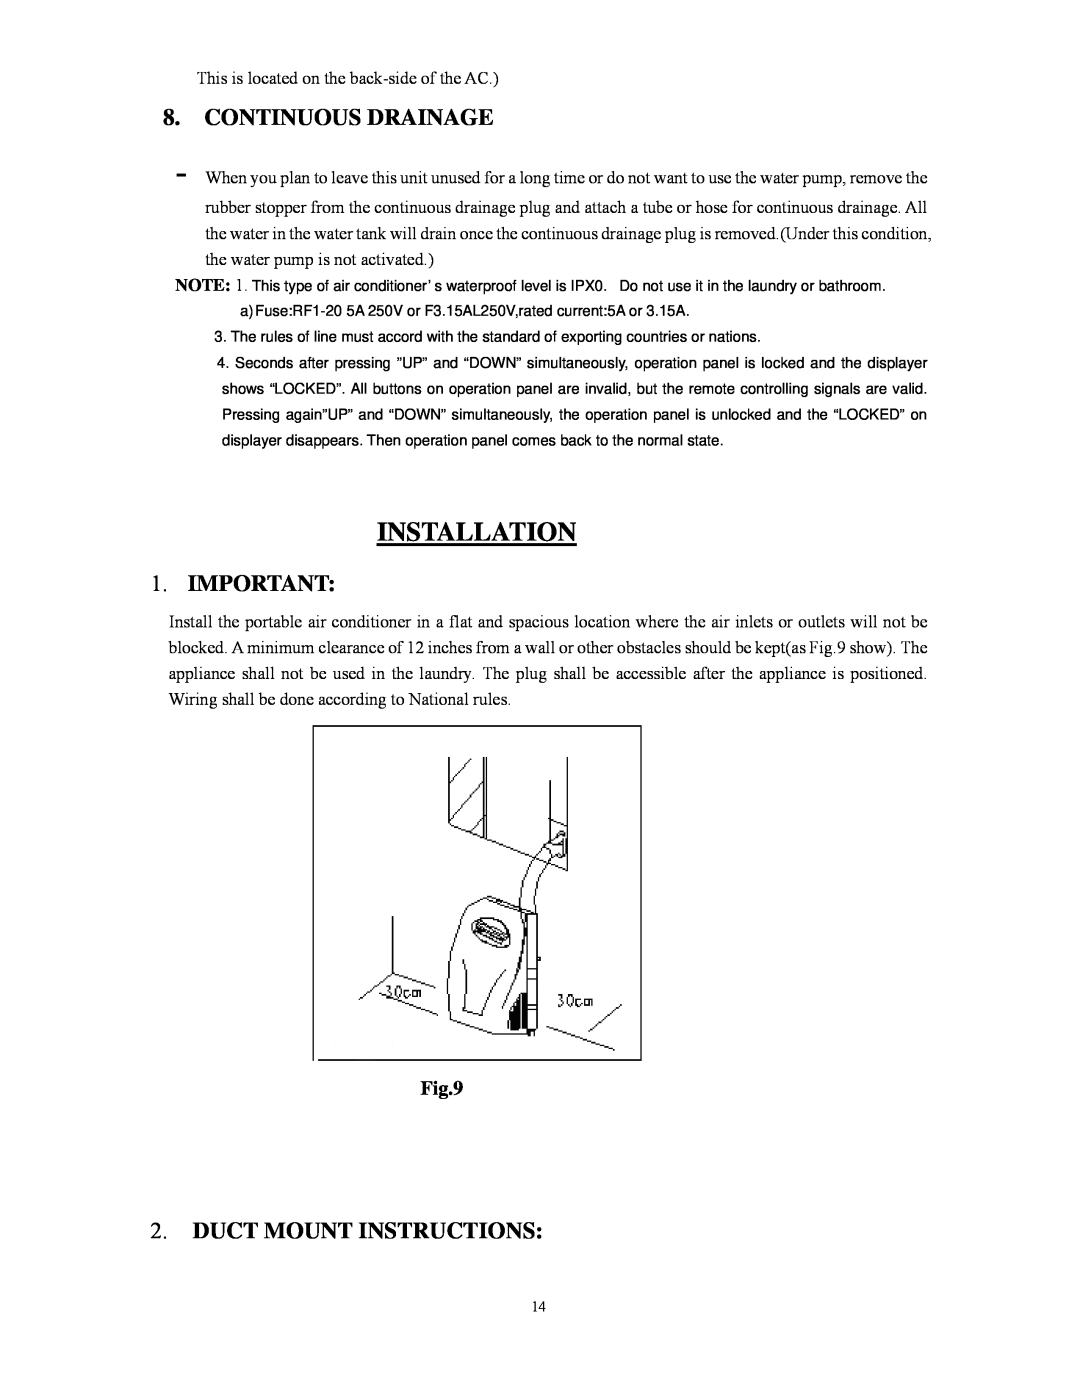 Alen C475A, C360 user manual Installation, Continuous Drainage, Duct Mount Instructions 